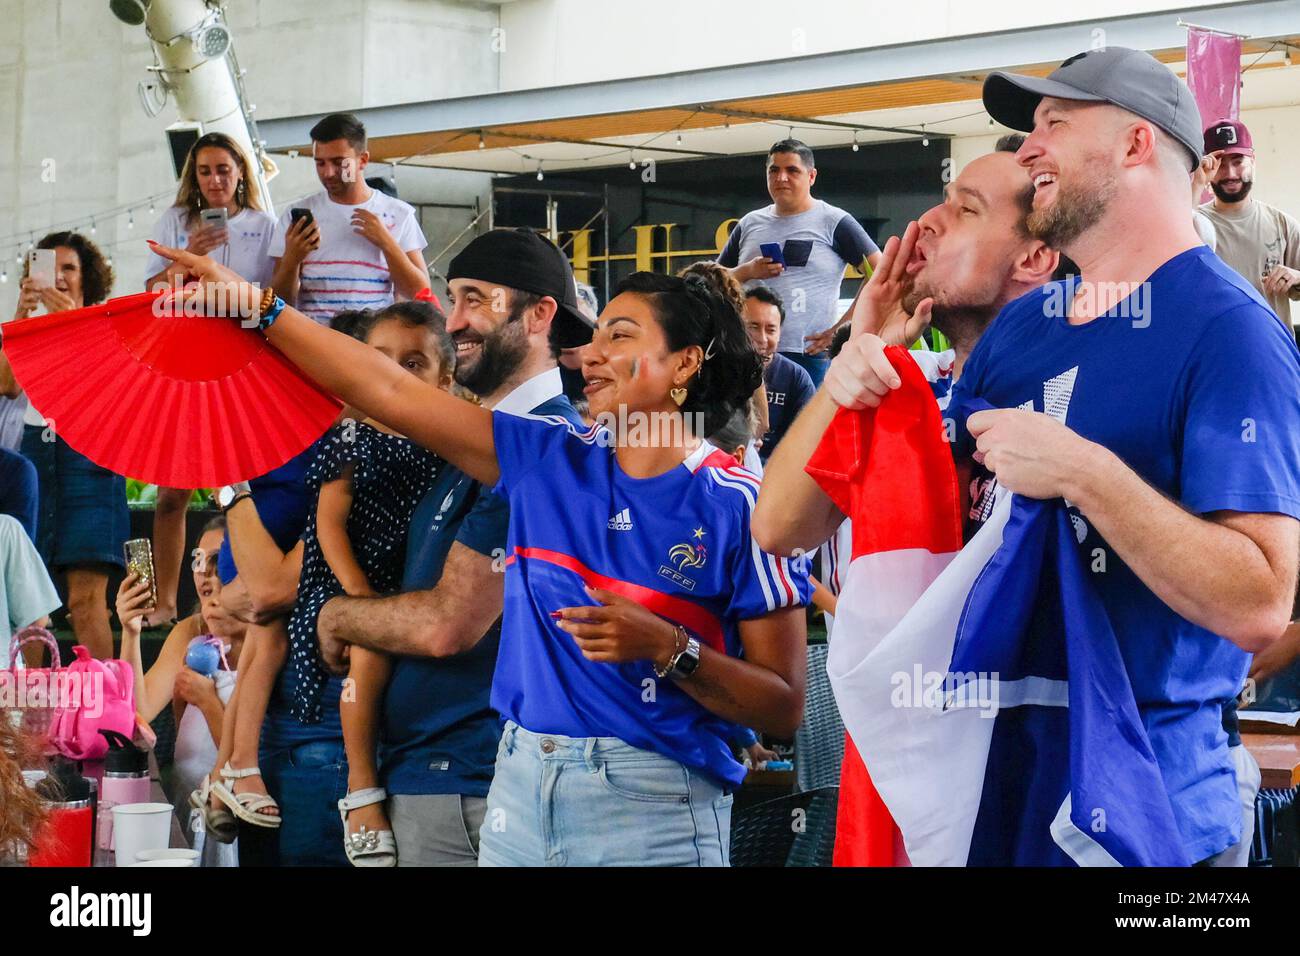 https://c8.alamy.com/comp/2M47X4A/soccer-fans-gathered-outside-a-cafe-in-merida-mexico-to-watch-the-fifa-world-final-cup-soccer-game-between-france-and-argentina-december-18-2022-2M47X4A.jpg